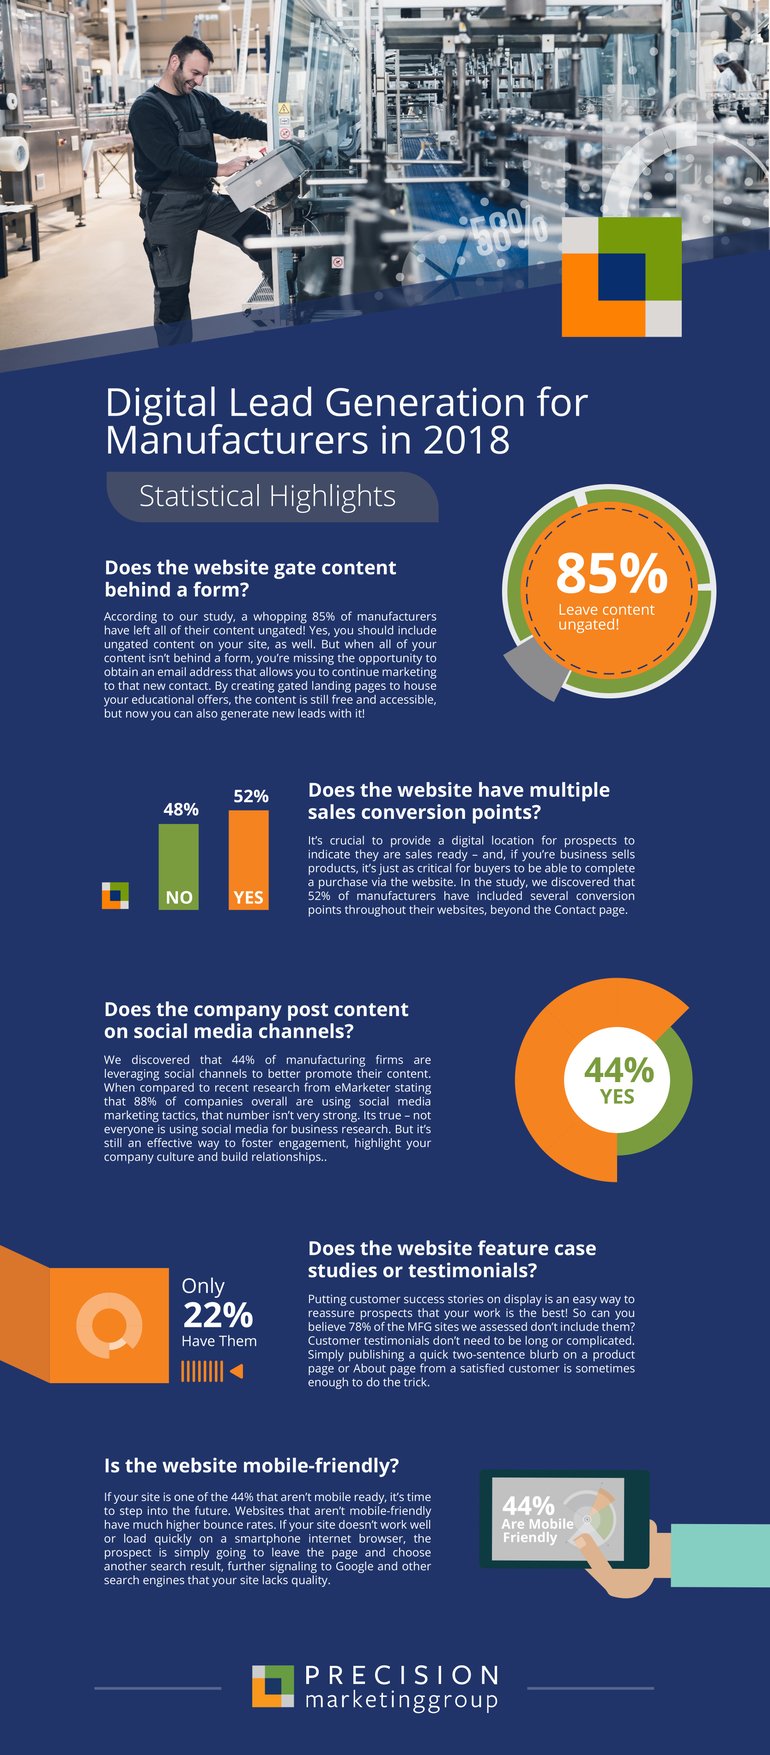 [Infographic] 5 stats from "Digital Lead Generation for Manufacturers in 2018" study